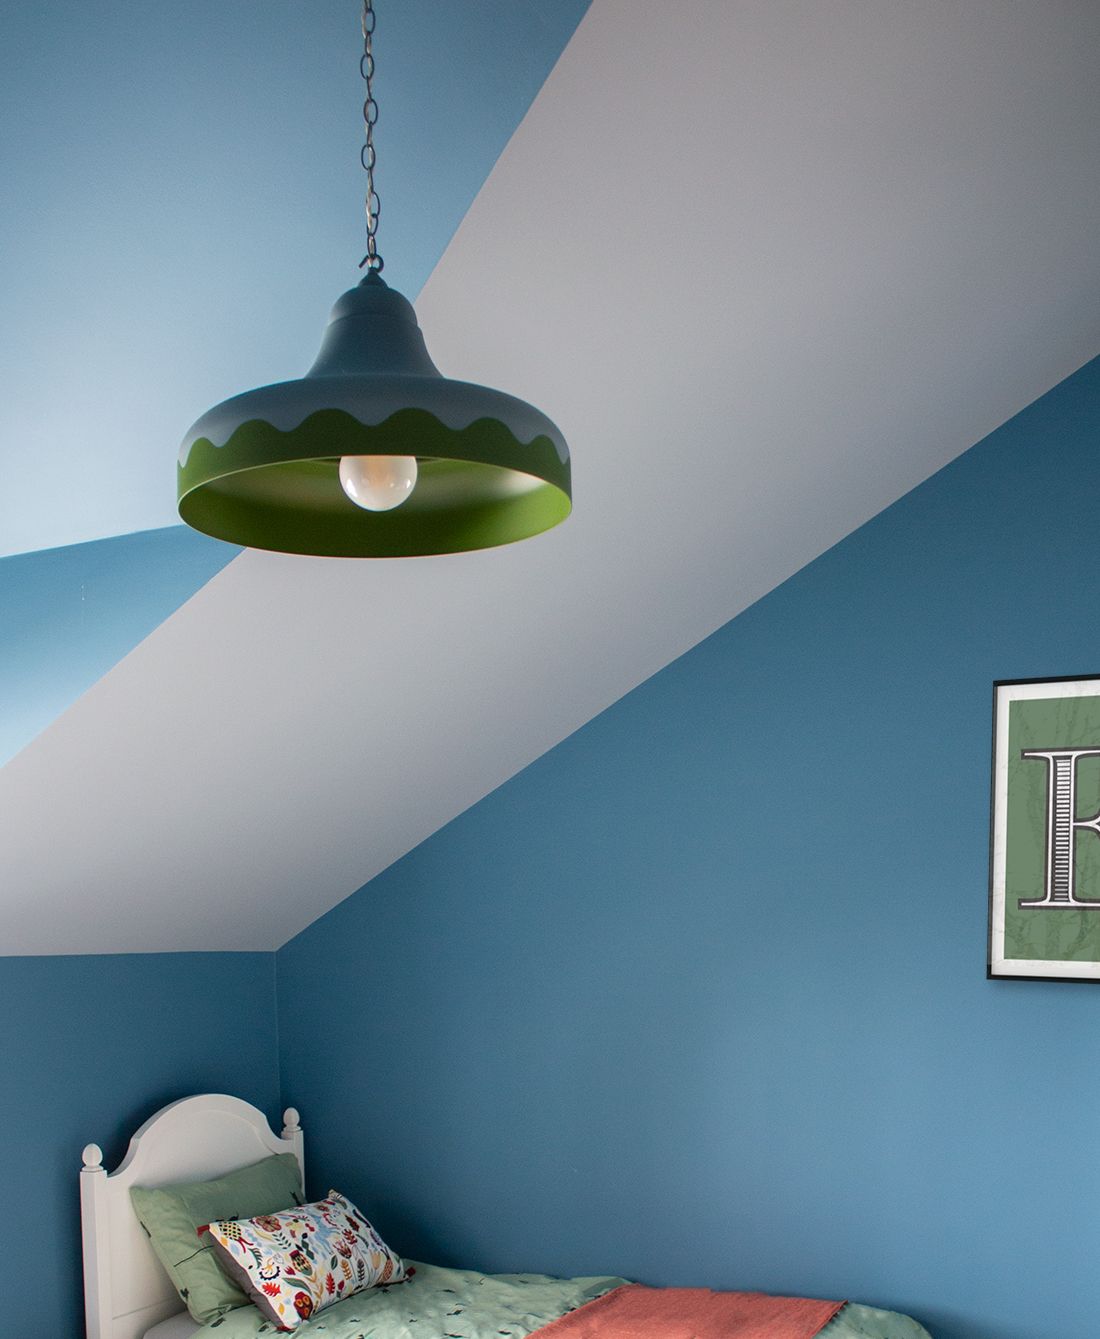 A photo of a child's bedroom showing blue walls with yellow accents, focused on the green and blue pendant light.